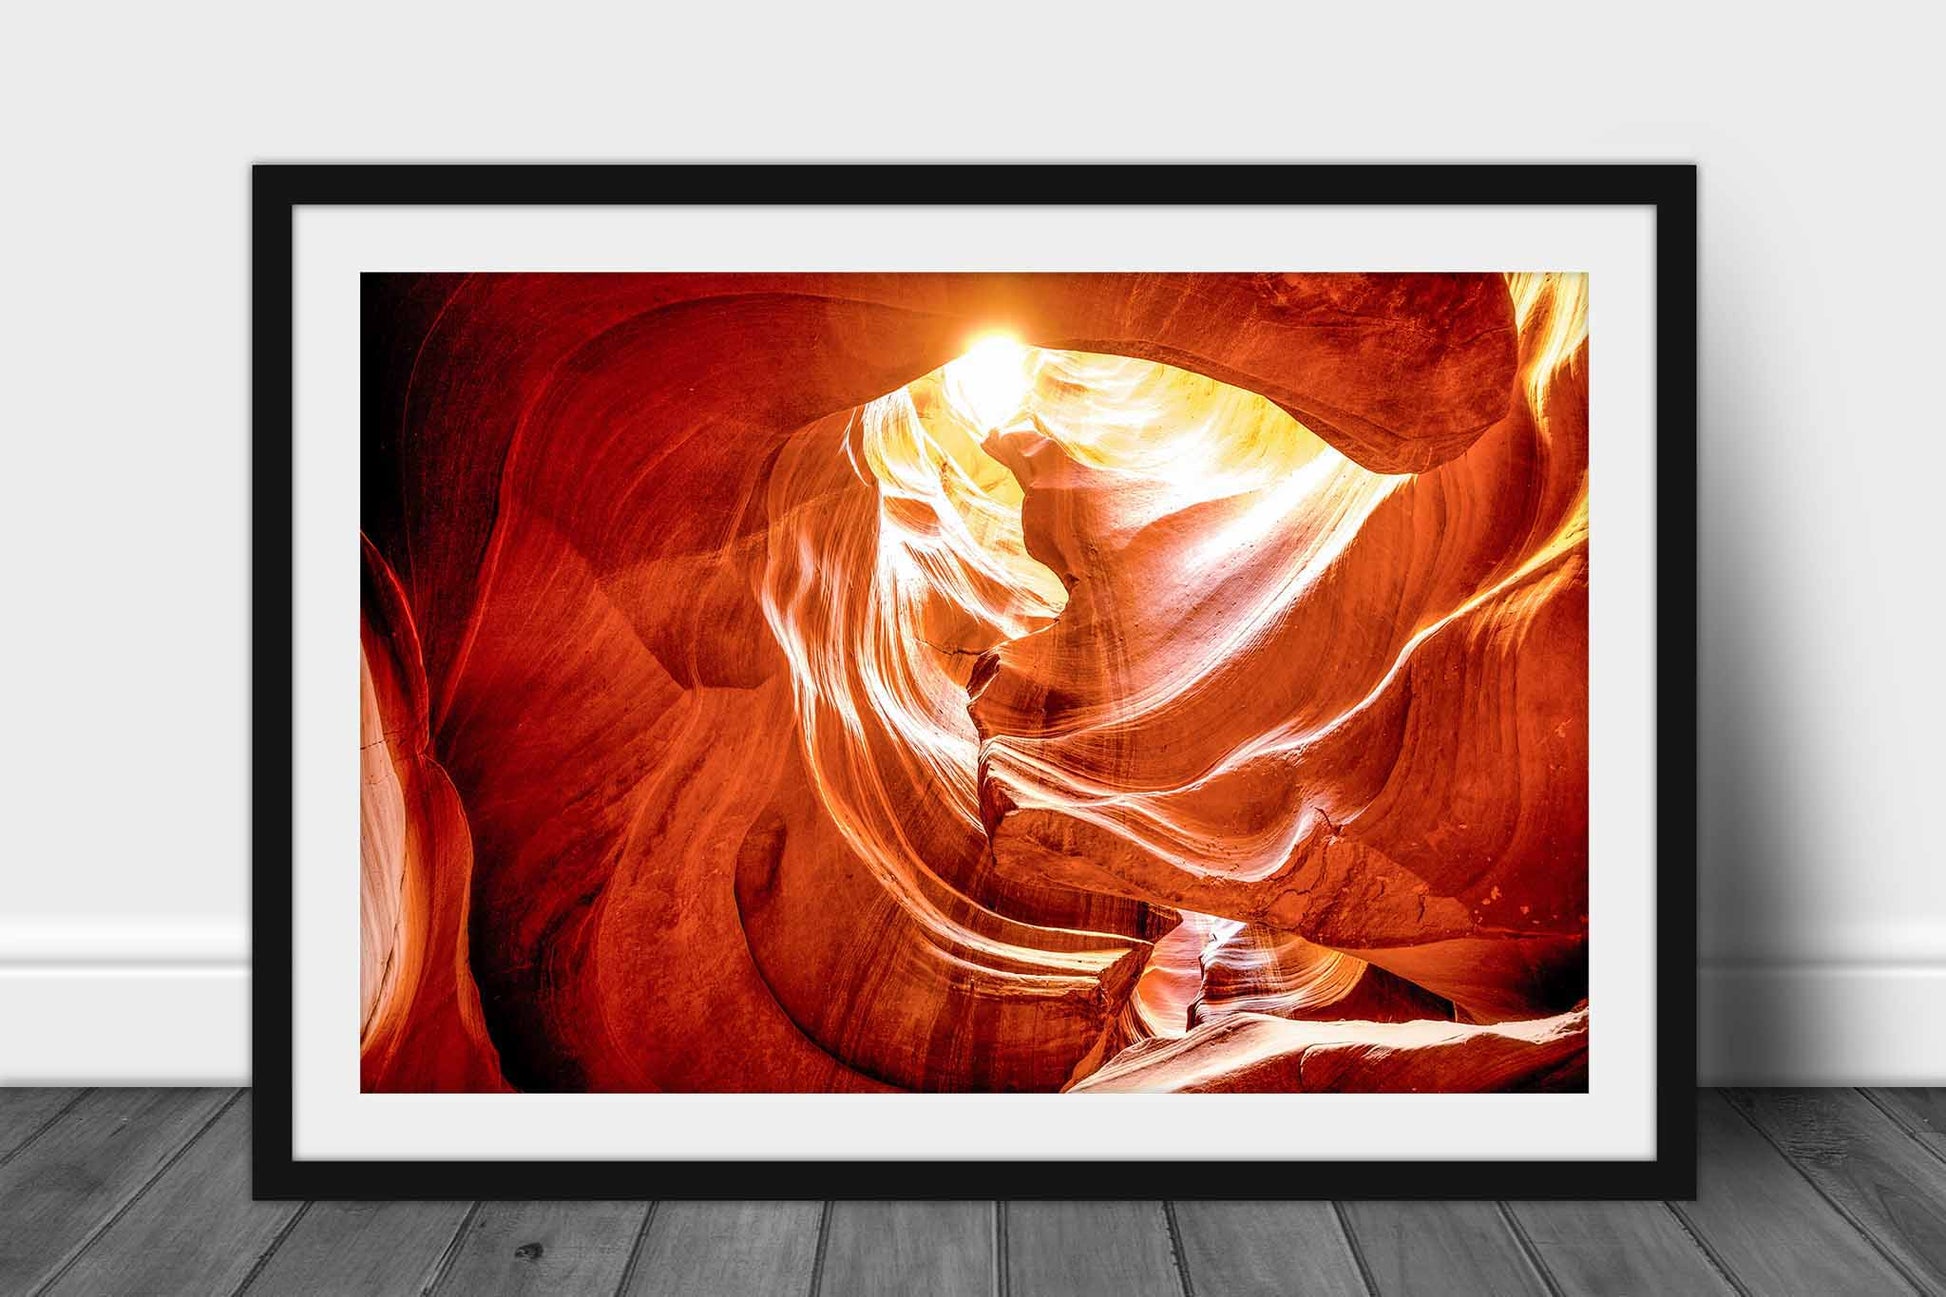 Framed Antelope Canyon print of sunlight shining through an opening in the slot canyon walls in the Arizona desert by Sean Ramsey of Southern Plains Photography.